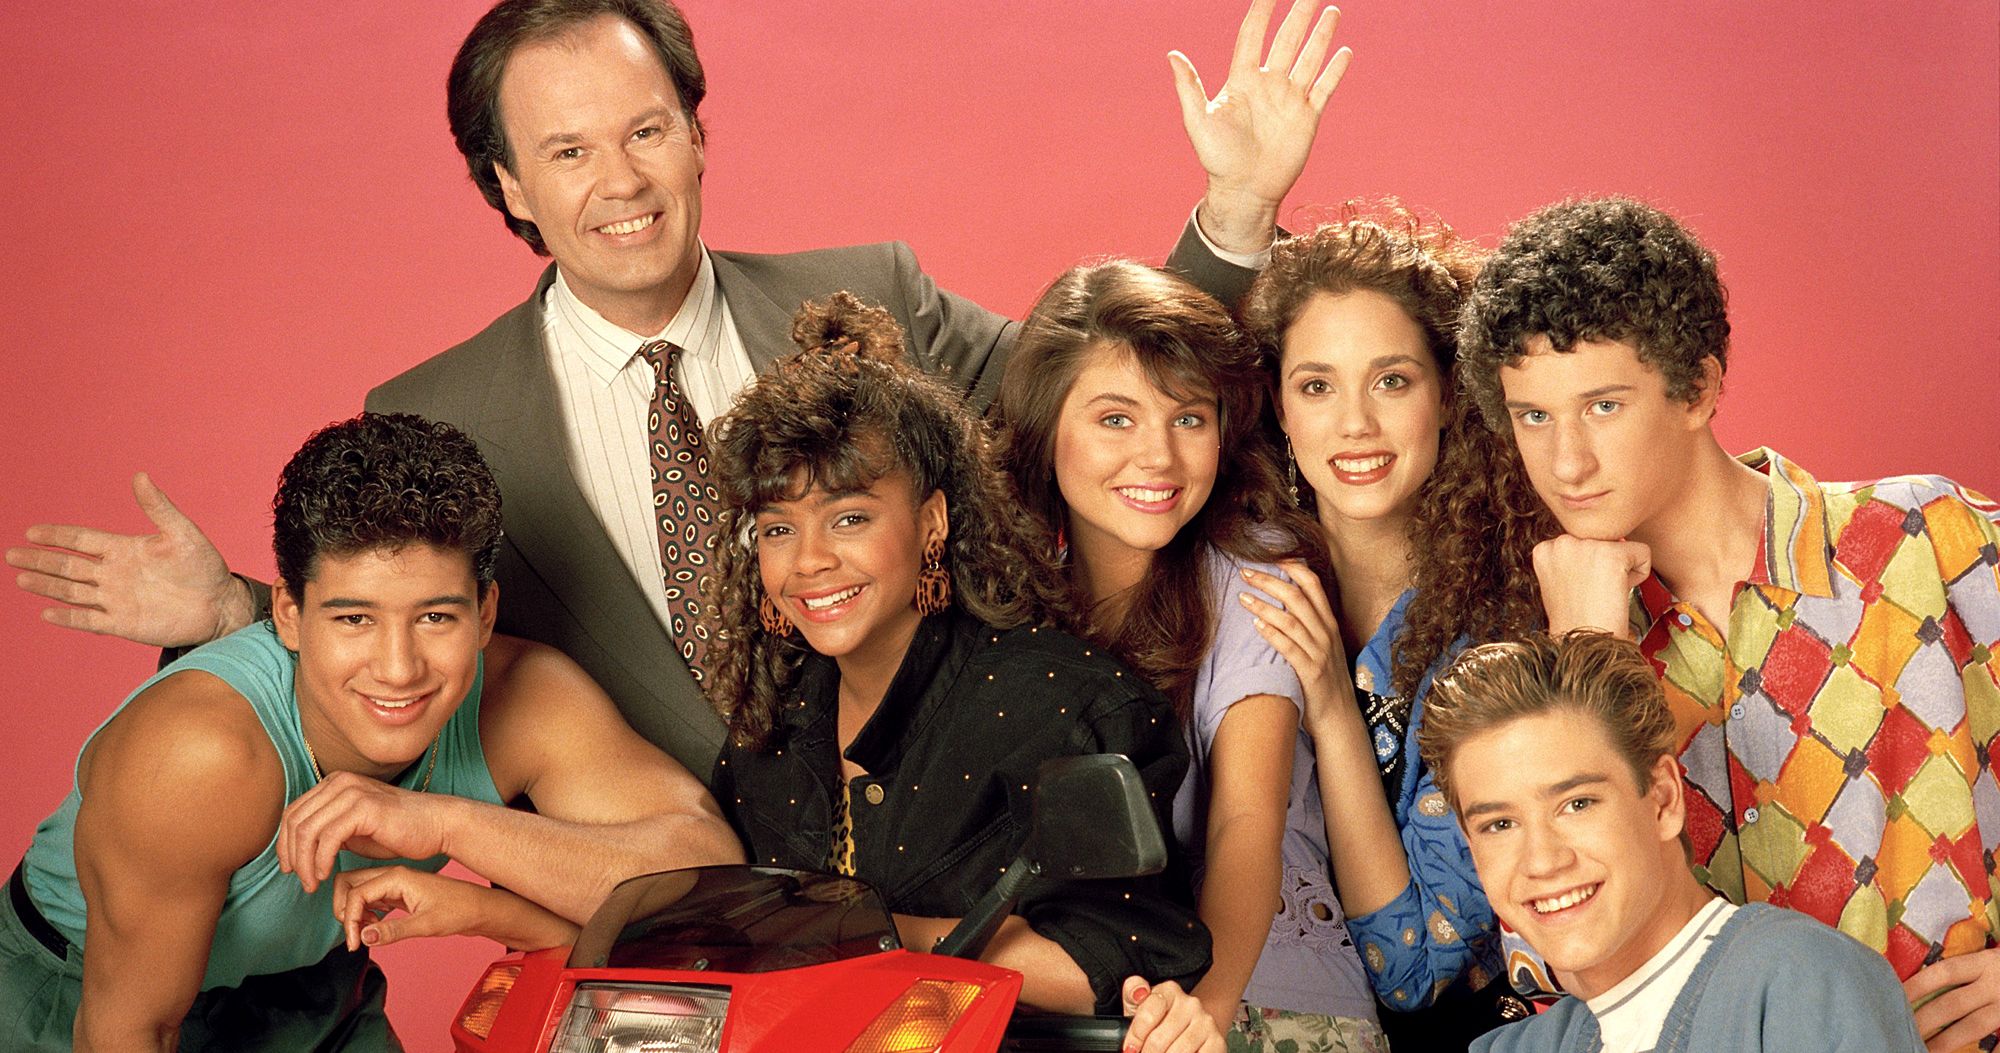 Every Saved by the Bell Episode Will Be Streaming on Netflix This September